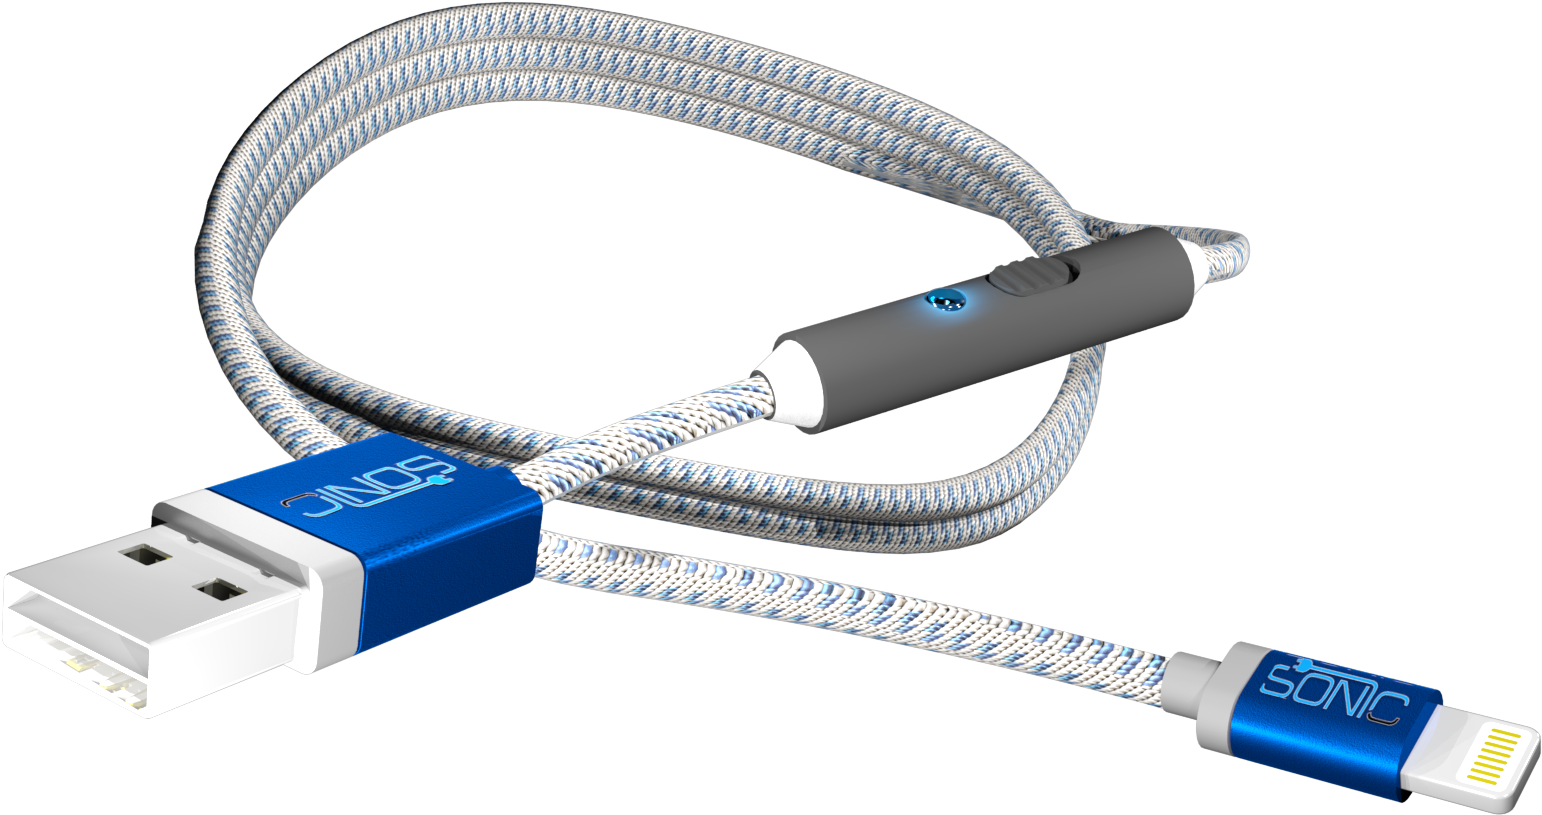 Braided U S B Lightning Cable PNG